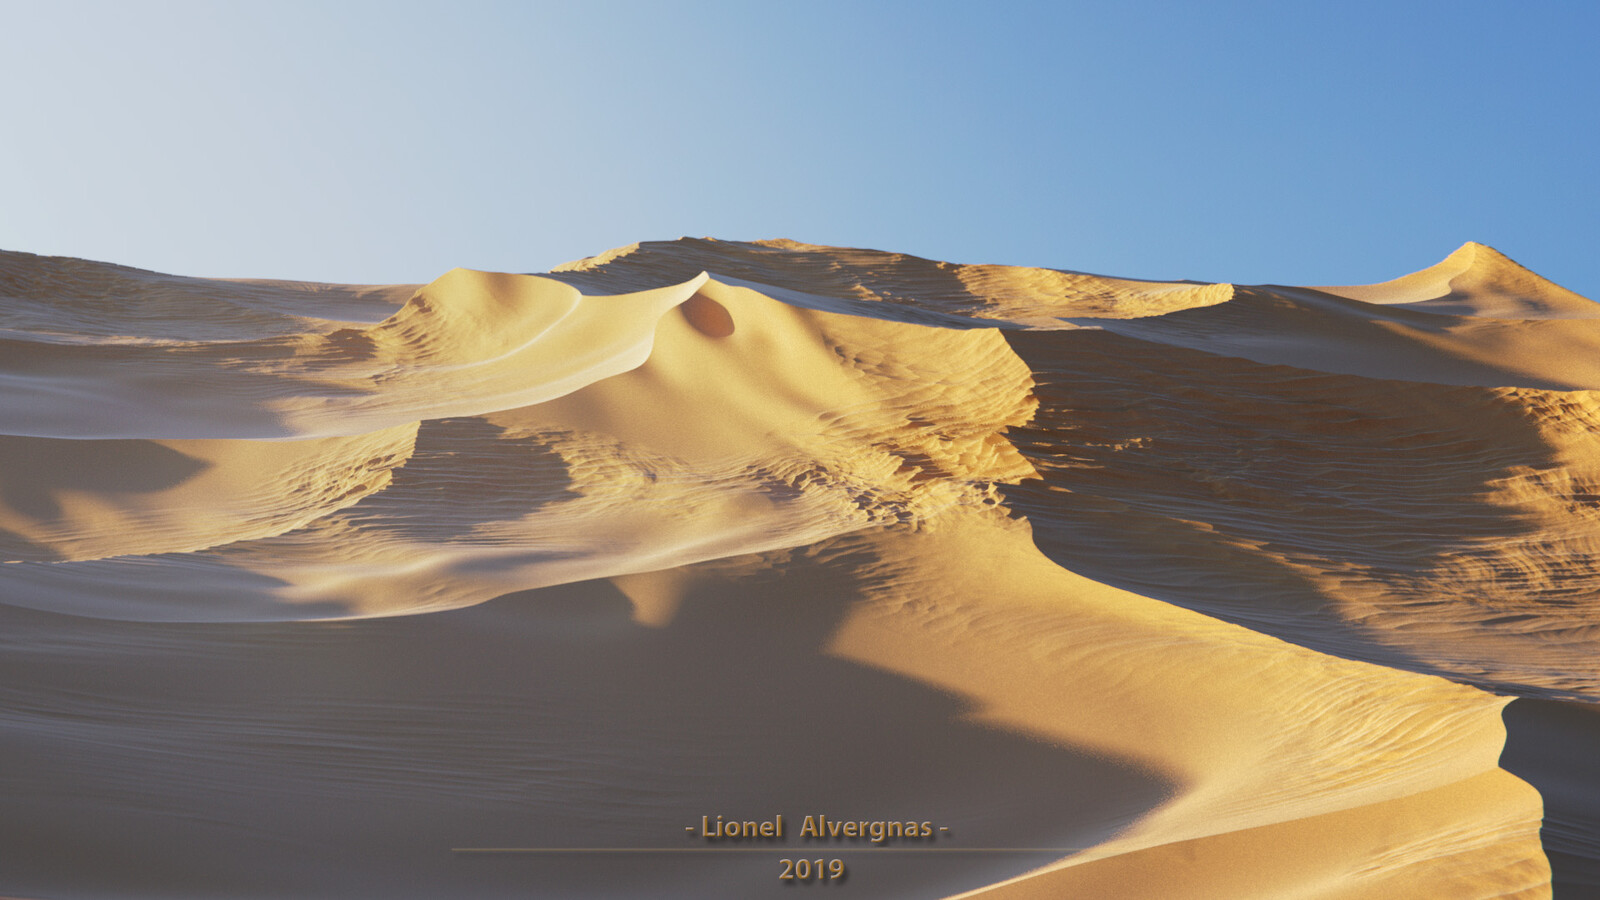 Virtual desert dunes... ;-) This doesn't exist!